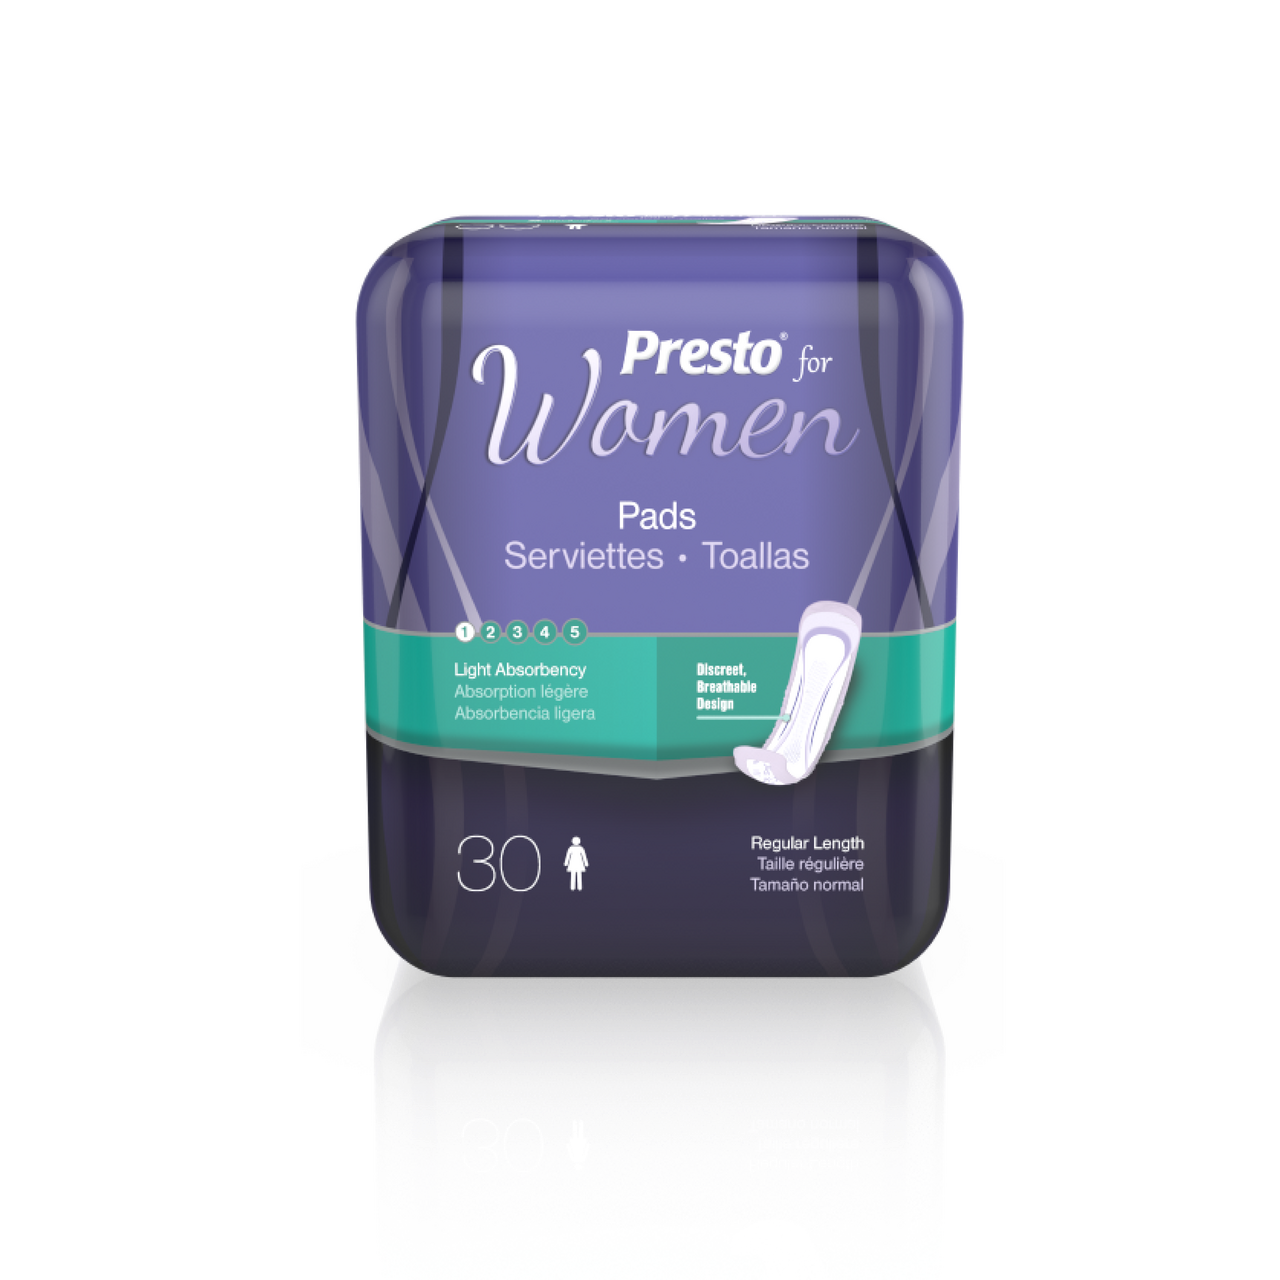 Presto Incontinence Pads for Women, Light Absorbency